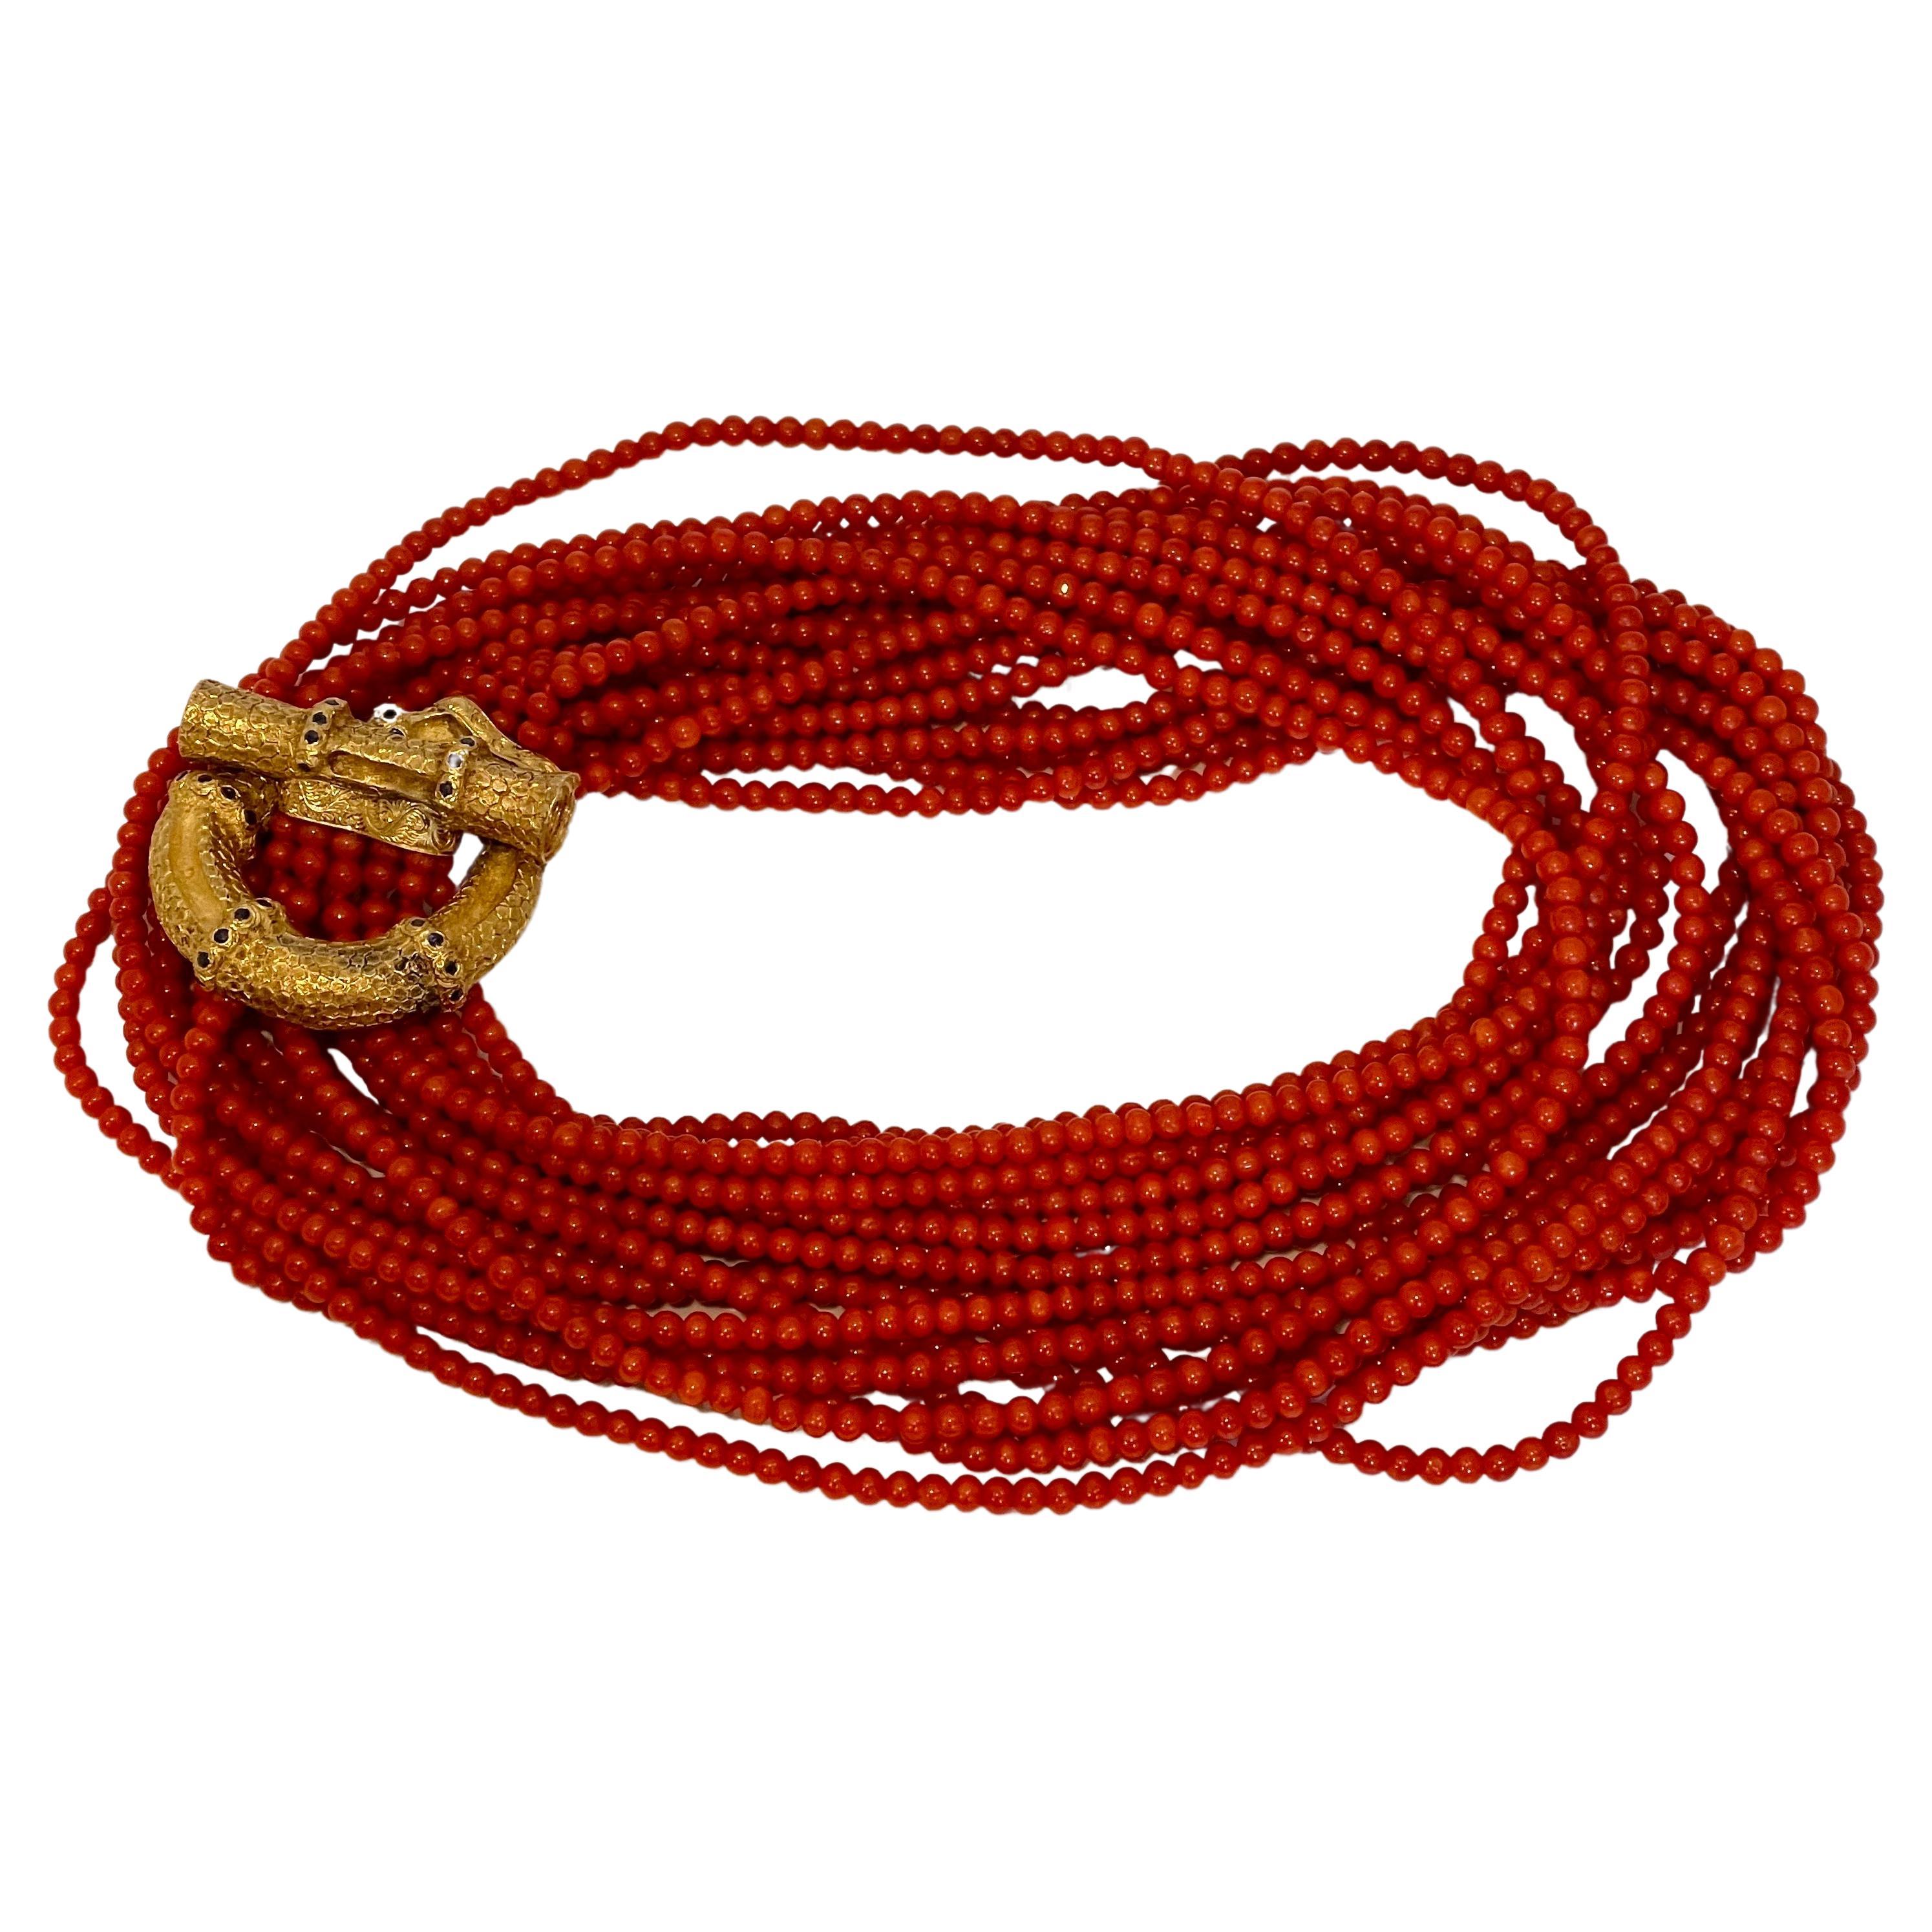 Vintage Natural Coral 4mm Multi Layer 10 Strand 920 CT Bead Necklace 18 KY Gold, 34 Inch long
A vintage piece.
There are round tiny natural sapphires on the gold clasp all over.
Very Heavy 55 grams of gold clasp of 18 Karat gold
34 inch long
10